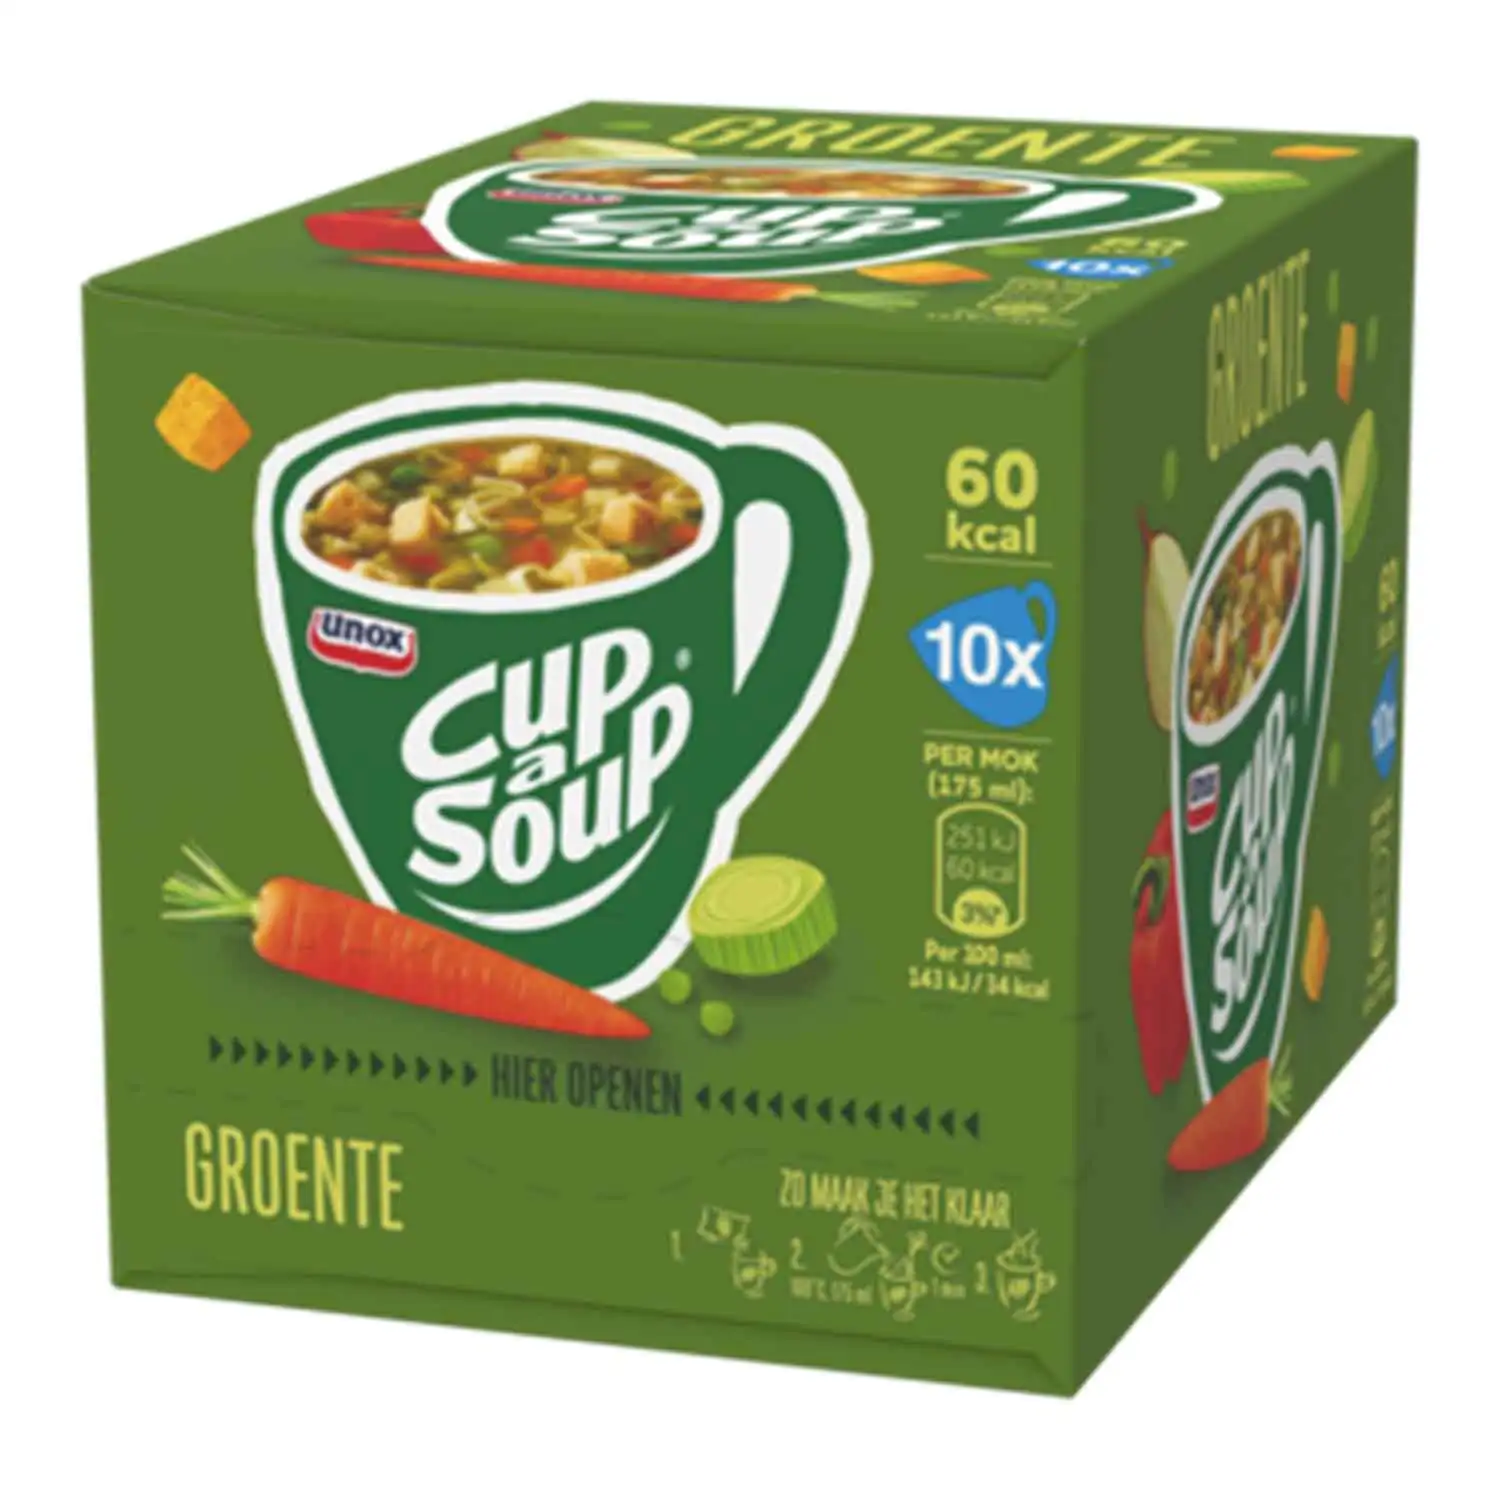 10x Cup a Soup legume 16g - Buy at Real Tobacco